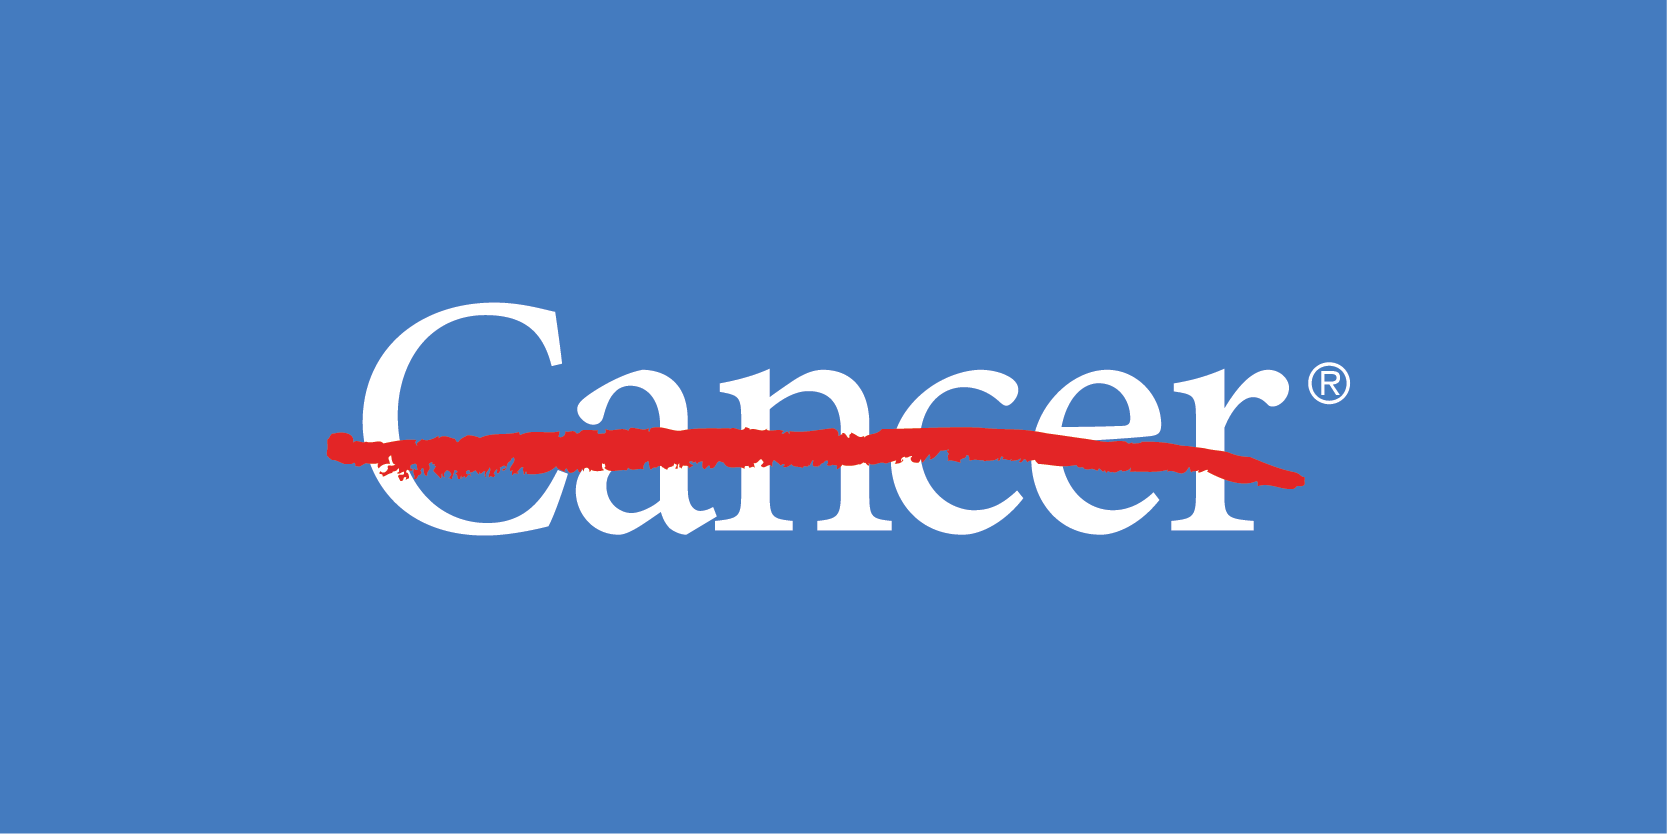 Canser Logo - Cancer Treatment & Cancer Research Hospital | MD Anderson Cancer Center